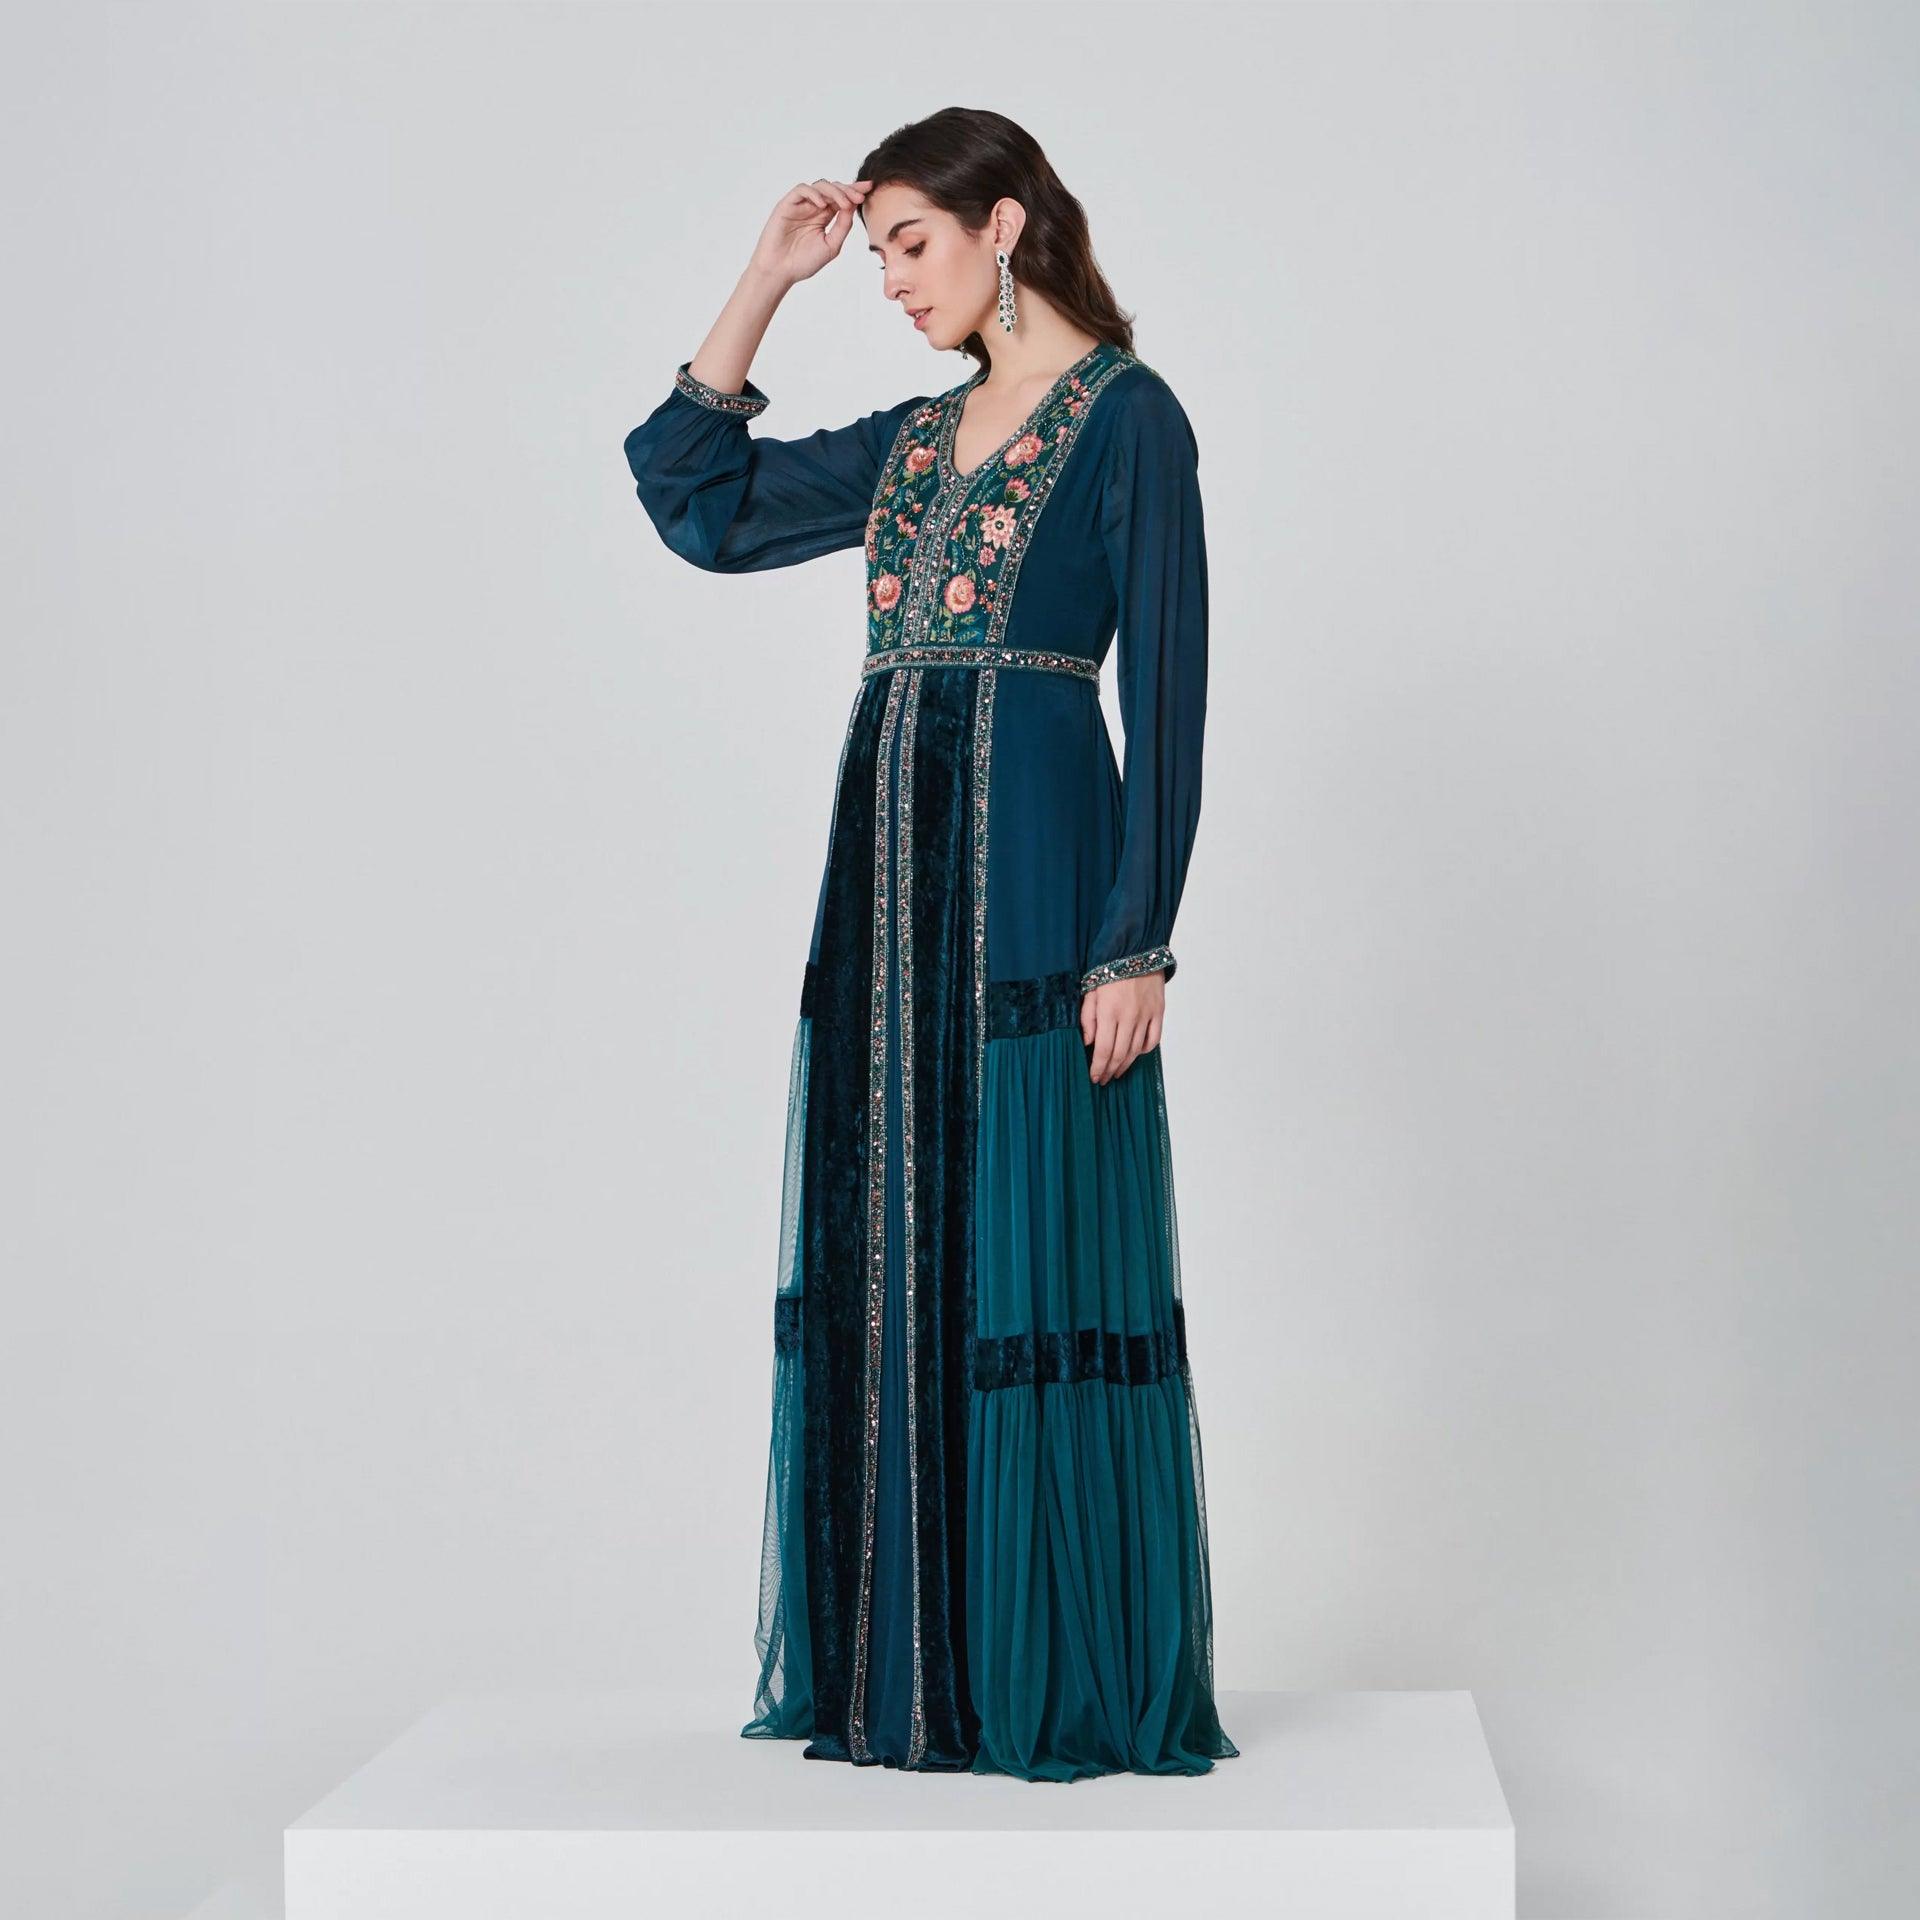 Petrol Crepe and Chiffon Embroidery Katrina Dress with Long Sleeves From Shalky - WECRE8